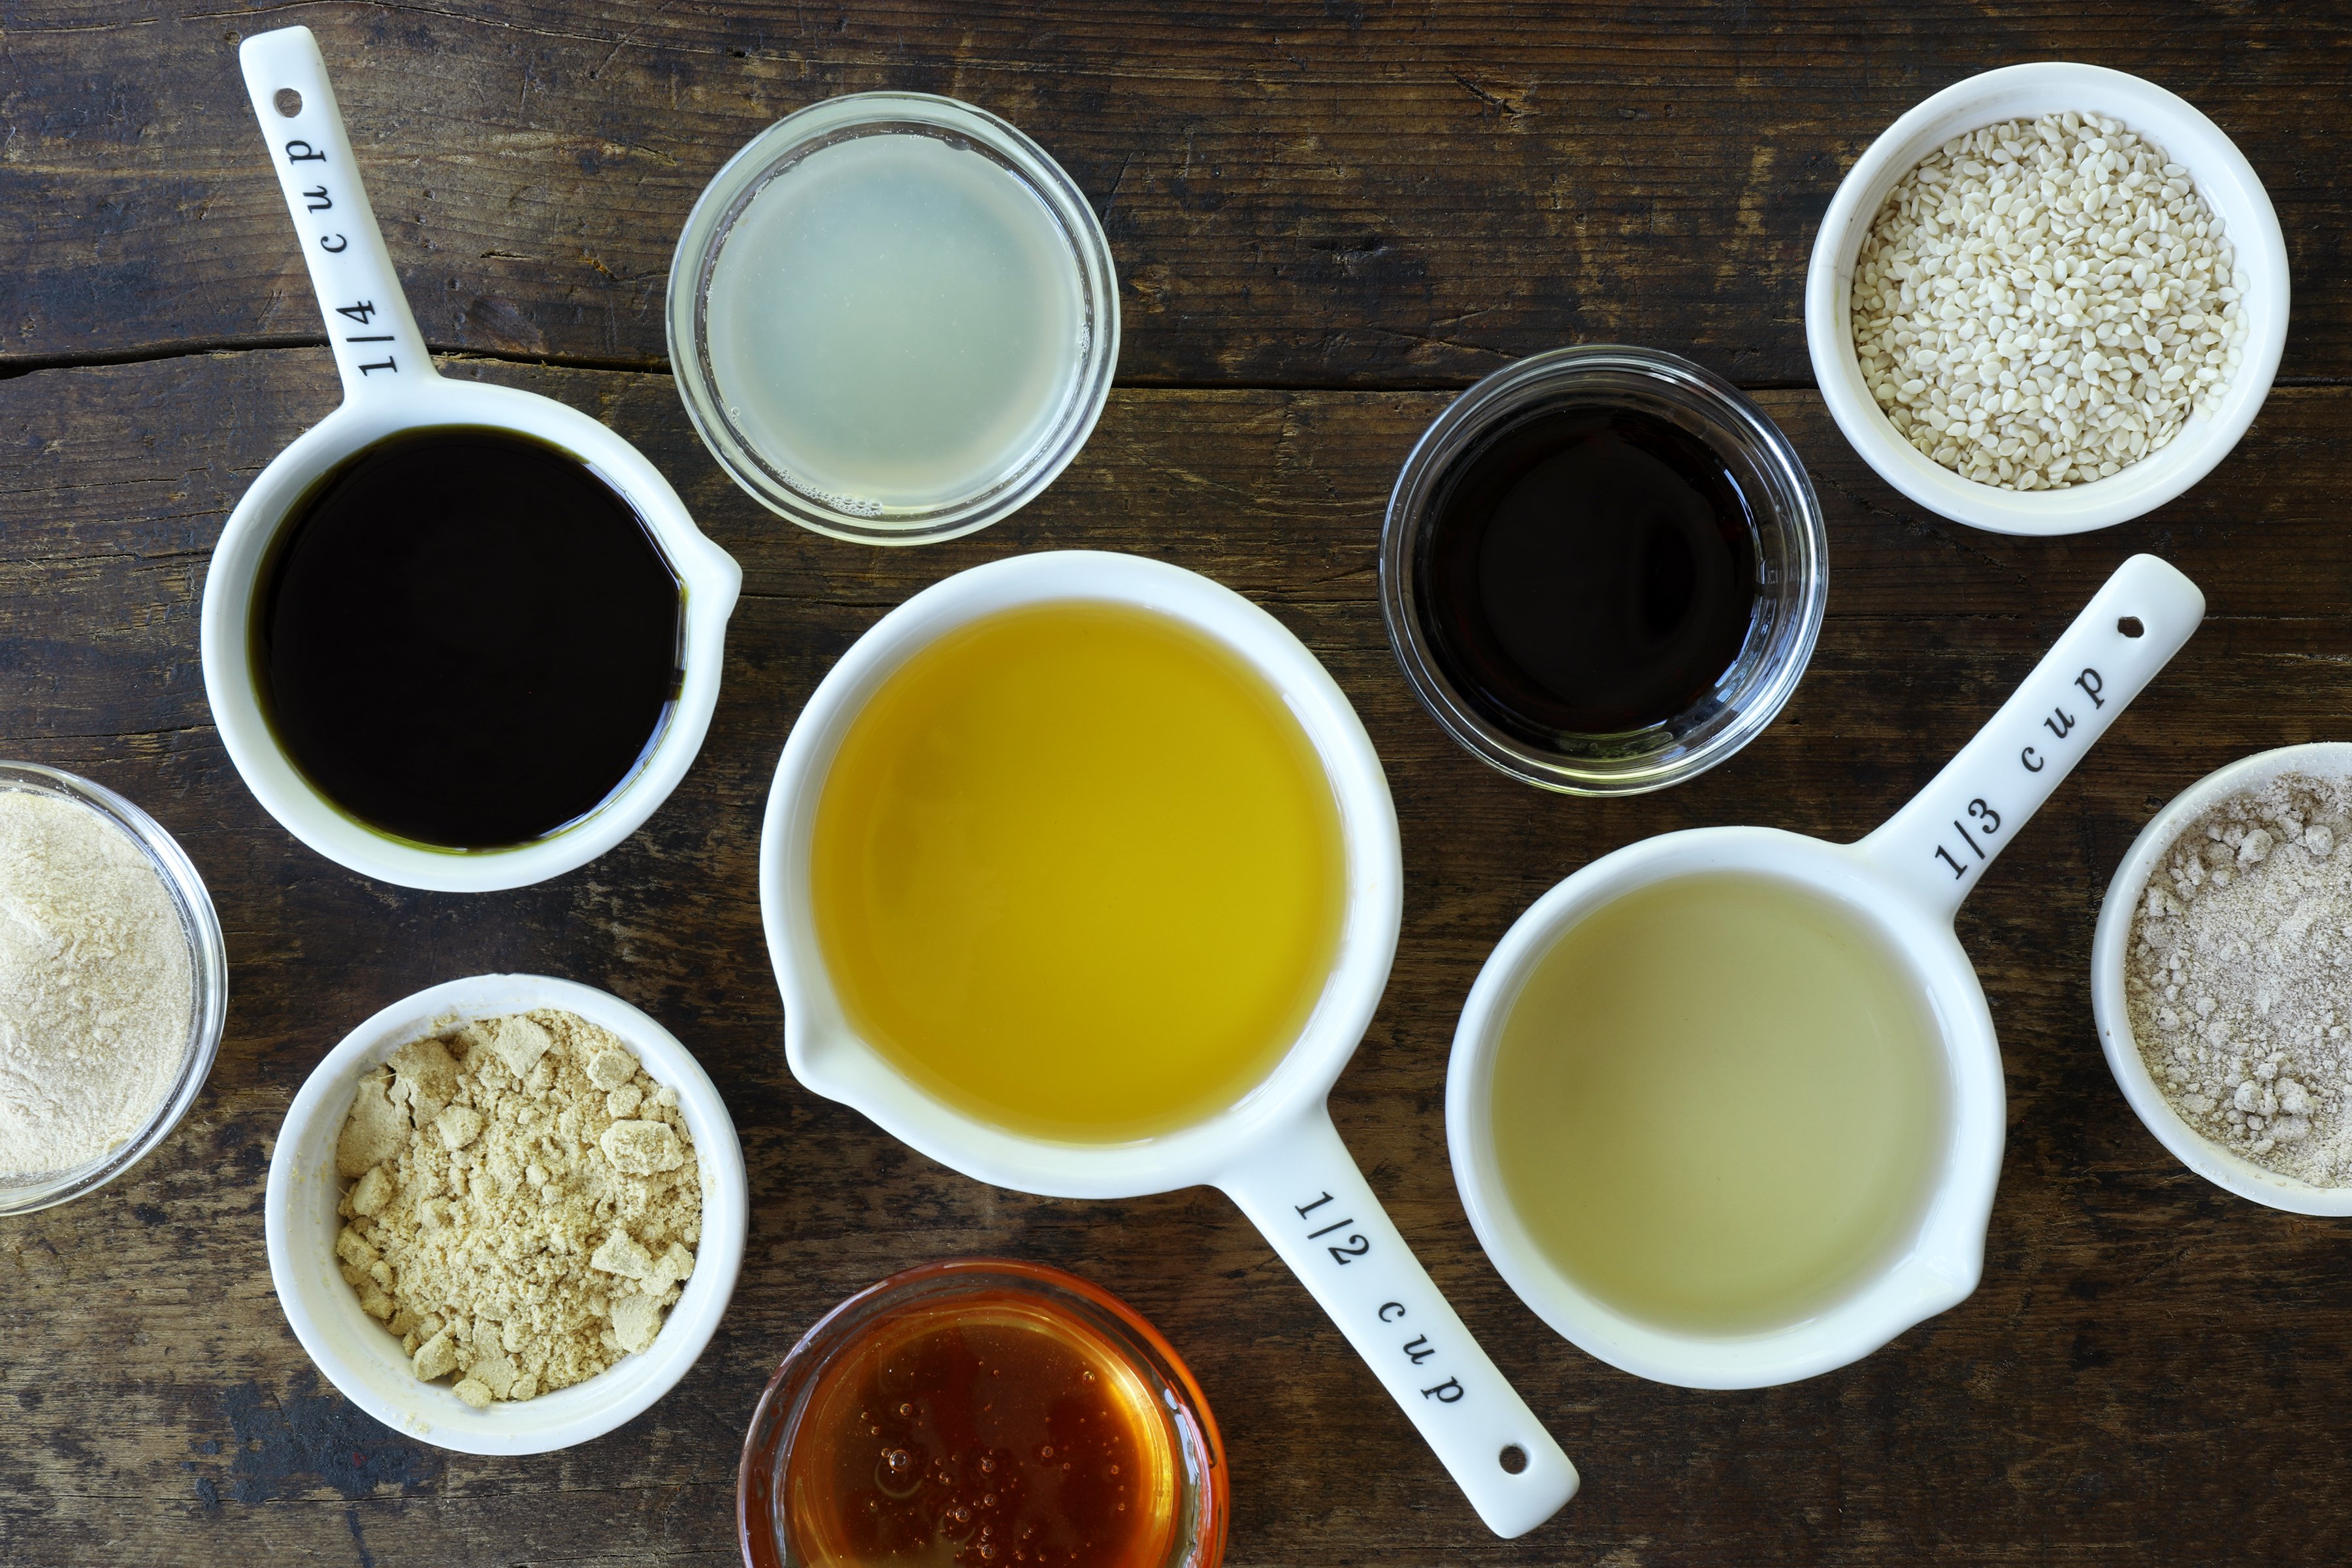 Measuring cups and bowls of oils and spices for Asian salad dressing arrayed on wooden table.